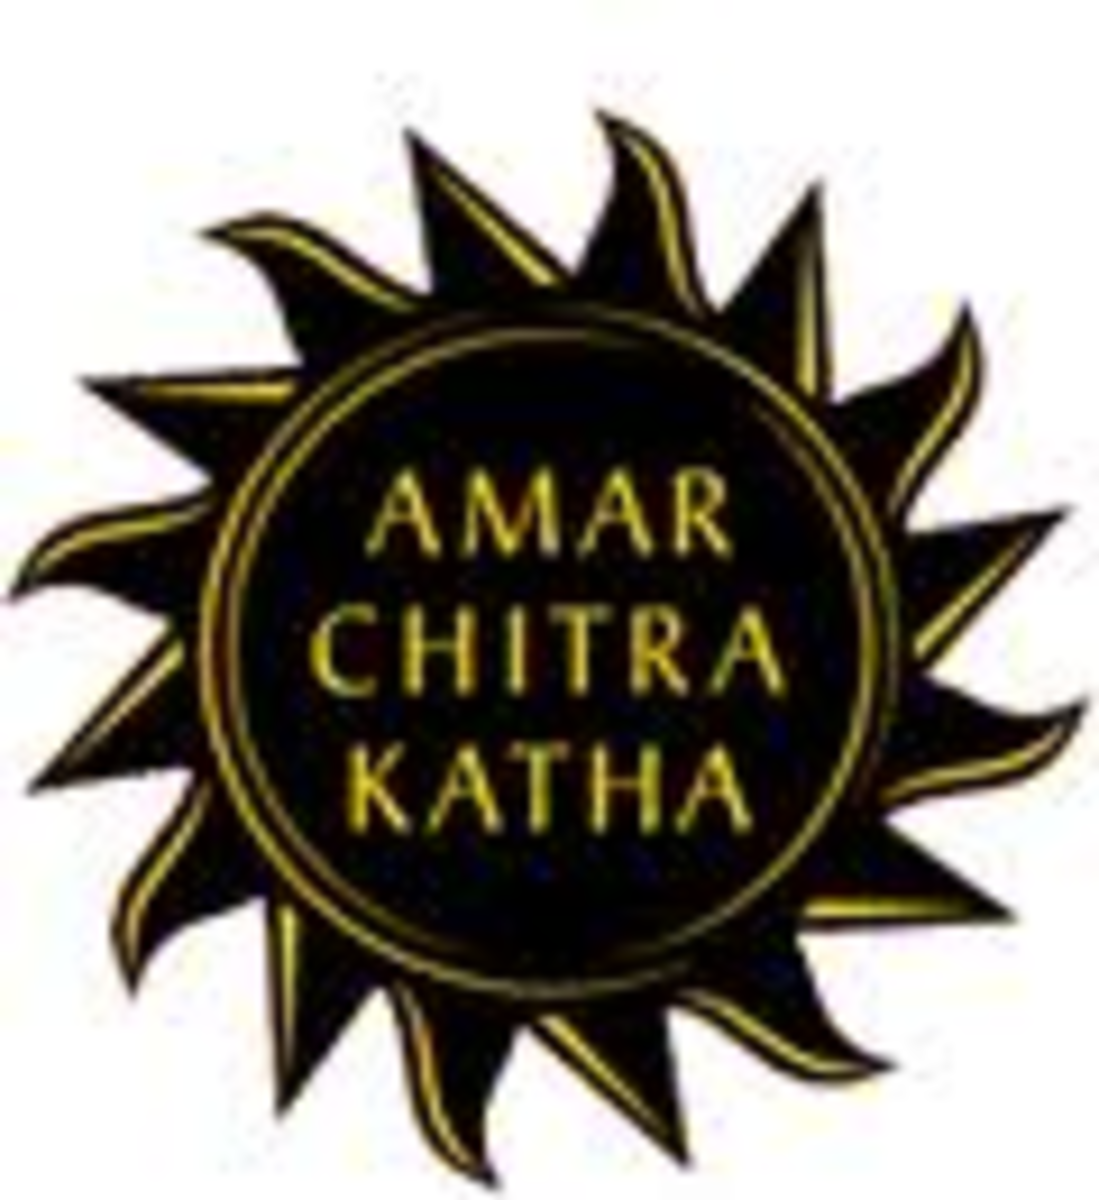 indias-comics-based-on-mythology-and-history-in-english-language-amar-chitra-katha-meaning-immortal-picture-stories